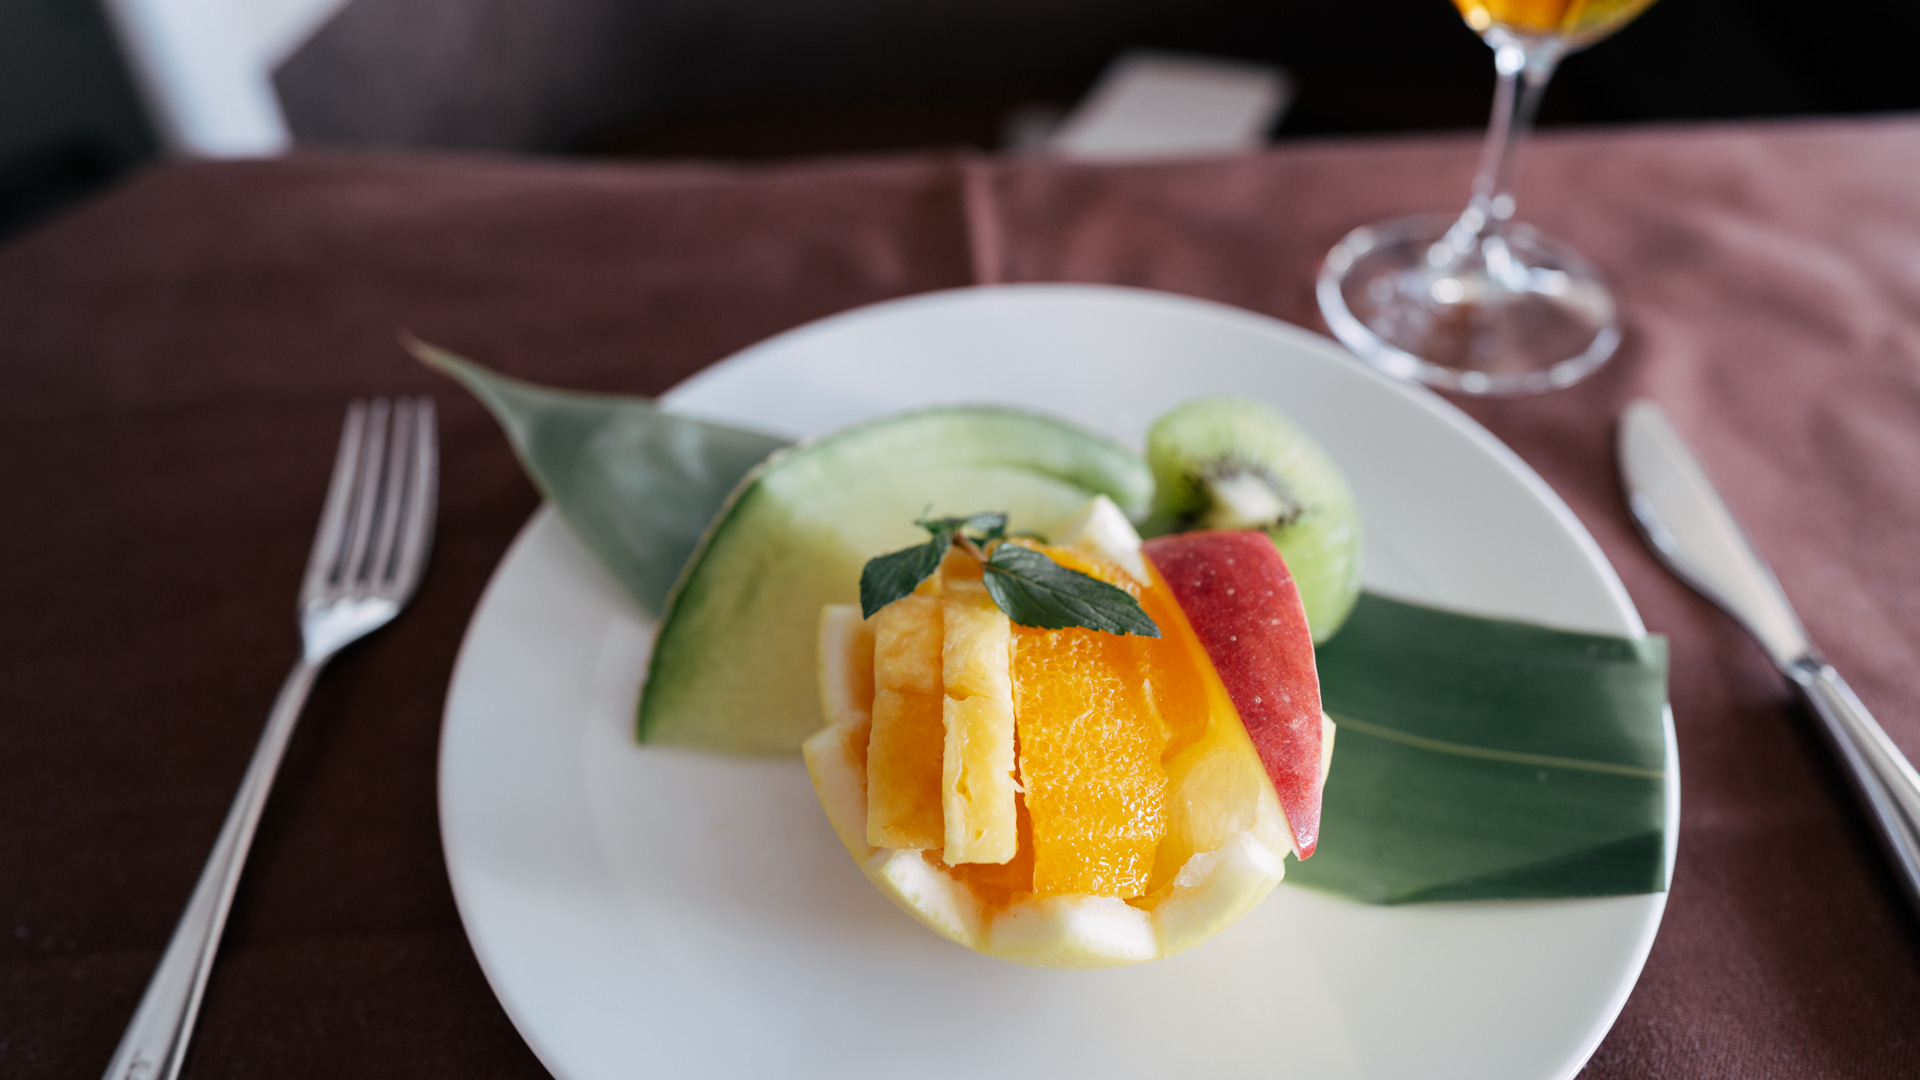 Japan Airlines Boeing 777 First Class fruit plate.